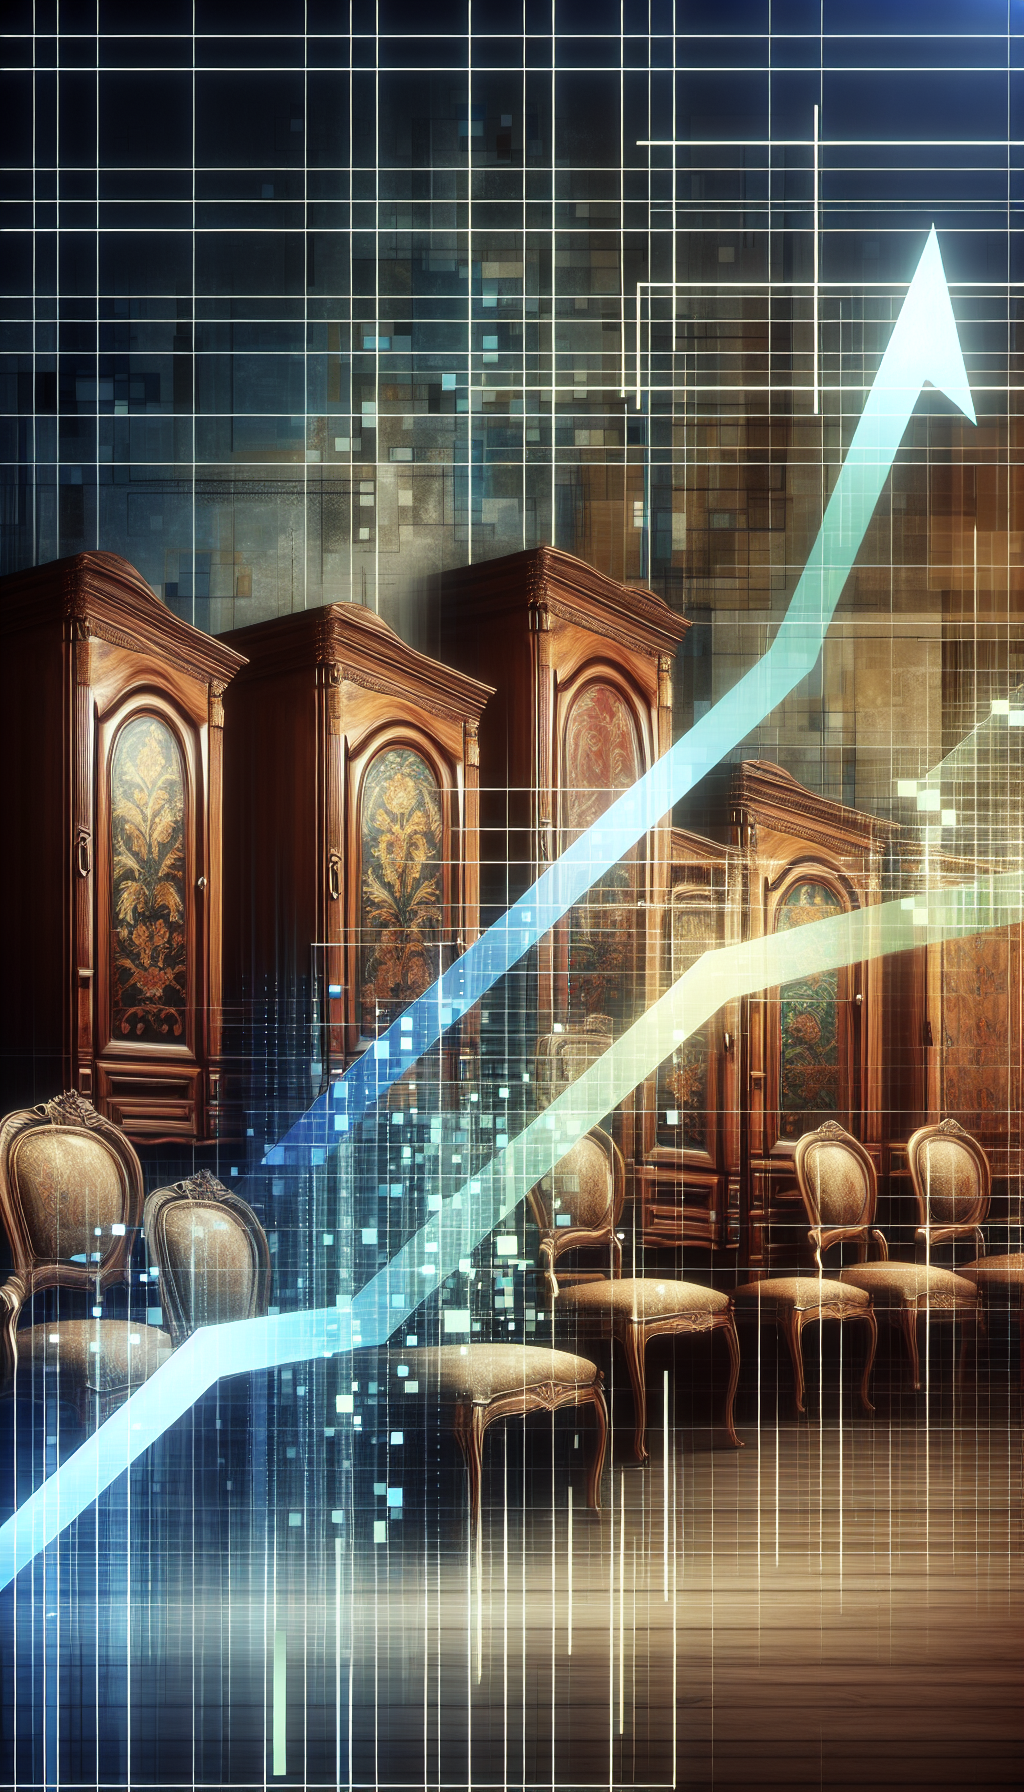 A juxtaposition of modernity and antiquity: the foreground shows a sleek, contemporary graph line inclining upwards over an array of elegant, subtly glowing antique armoires, hinting at their rising value. Splashes of baroque patterns fade into pixelated digital elements, symbolizing the interplay between past elegance and current market trends’ data-driven analysis.